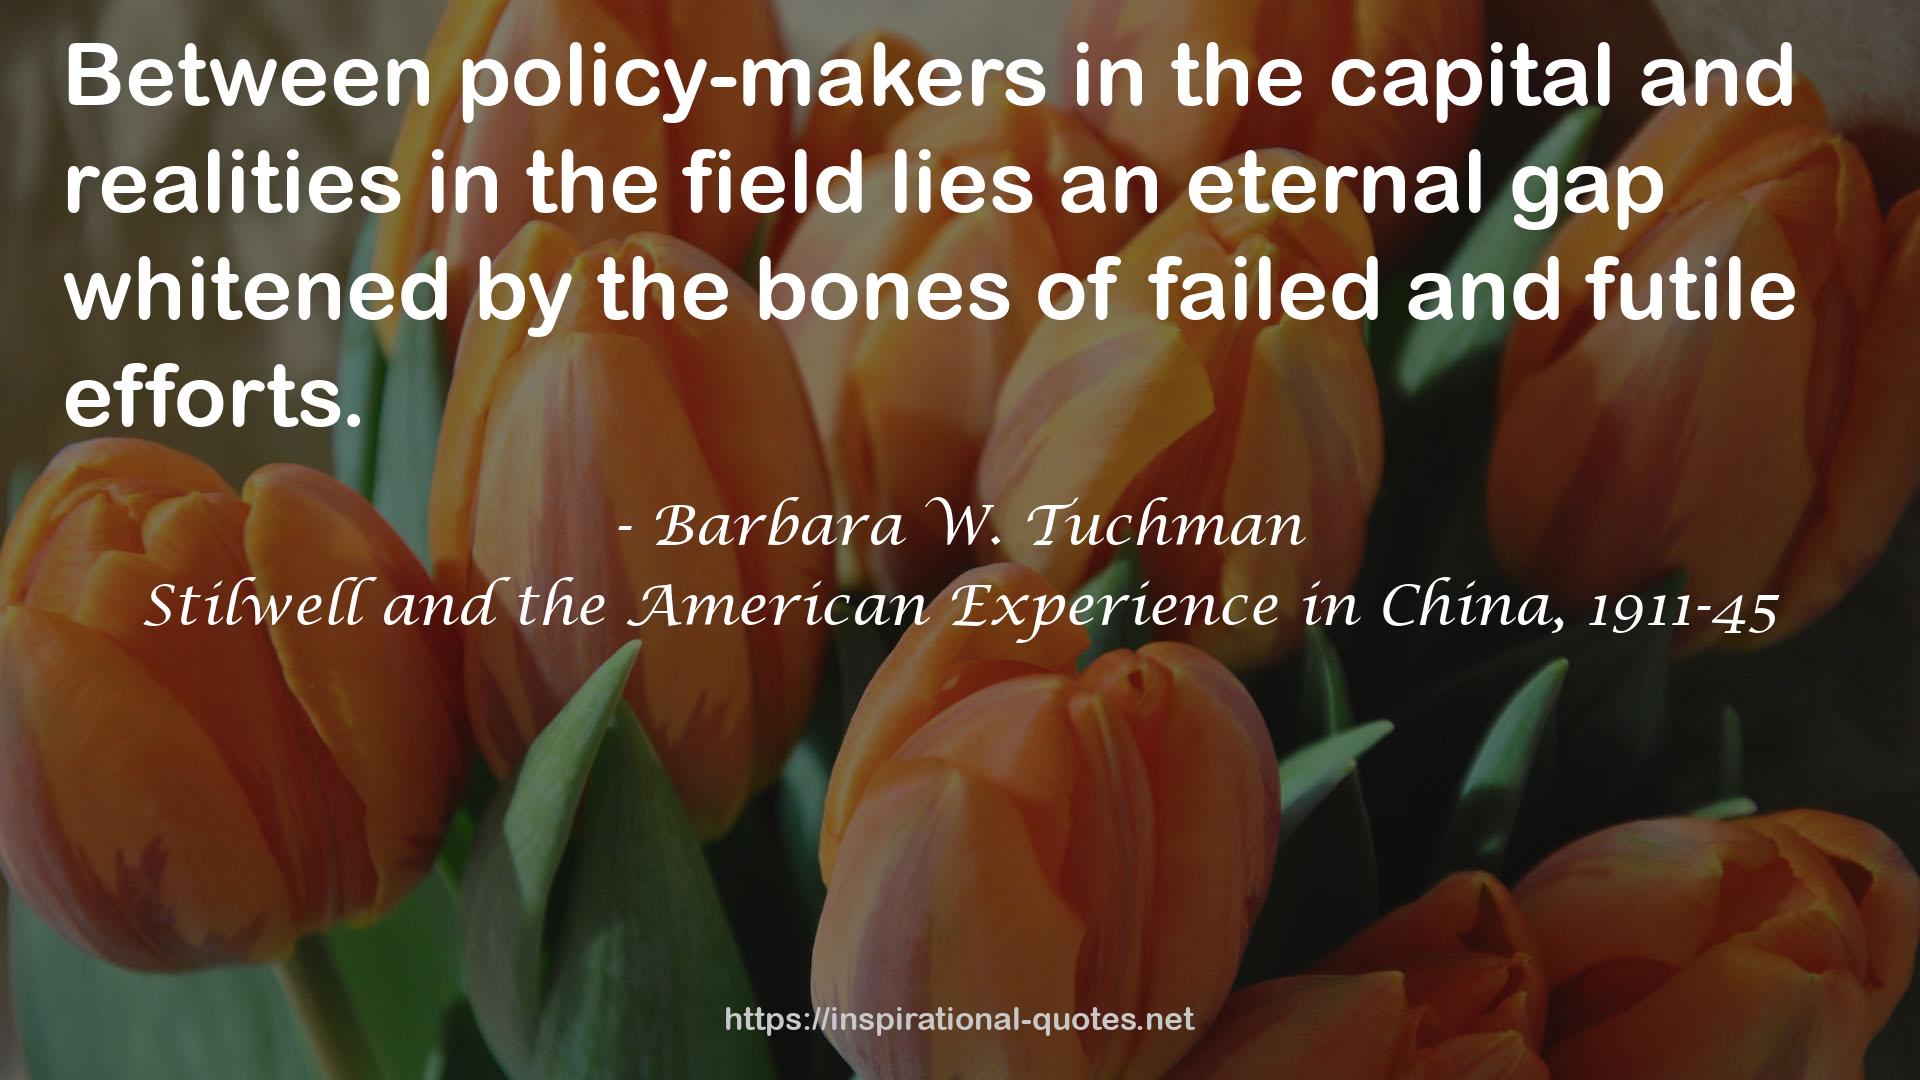 Stilwell and the American Experience in China, 1911-45 QUOTES